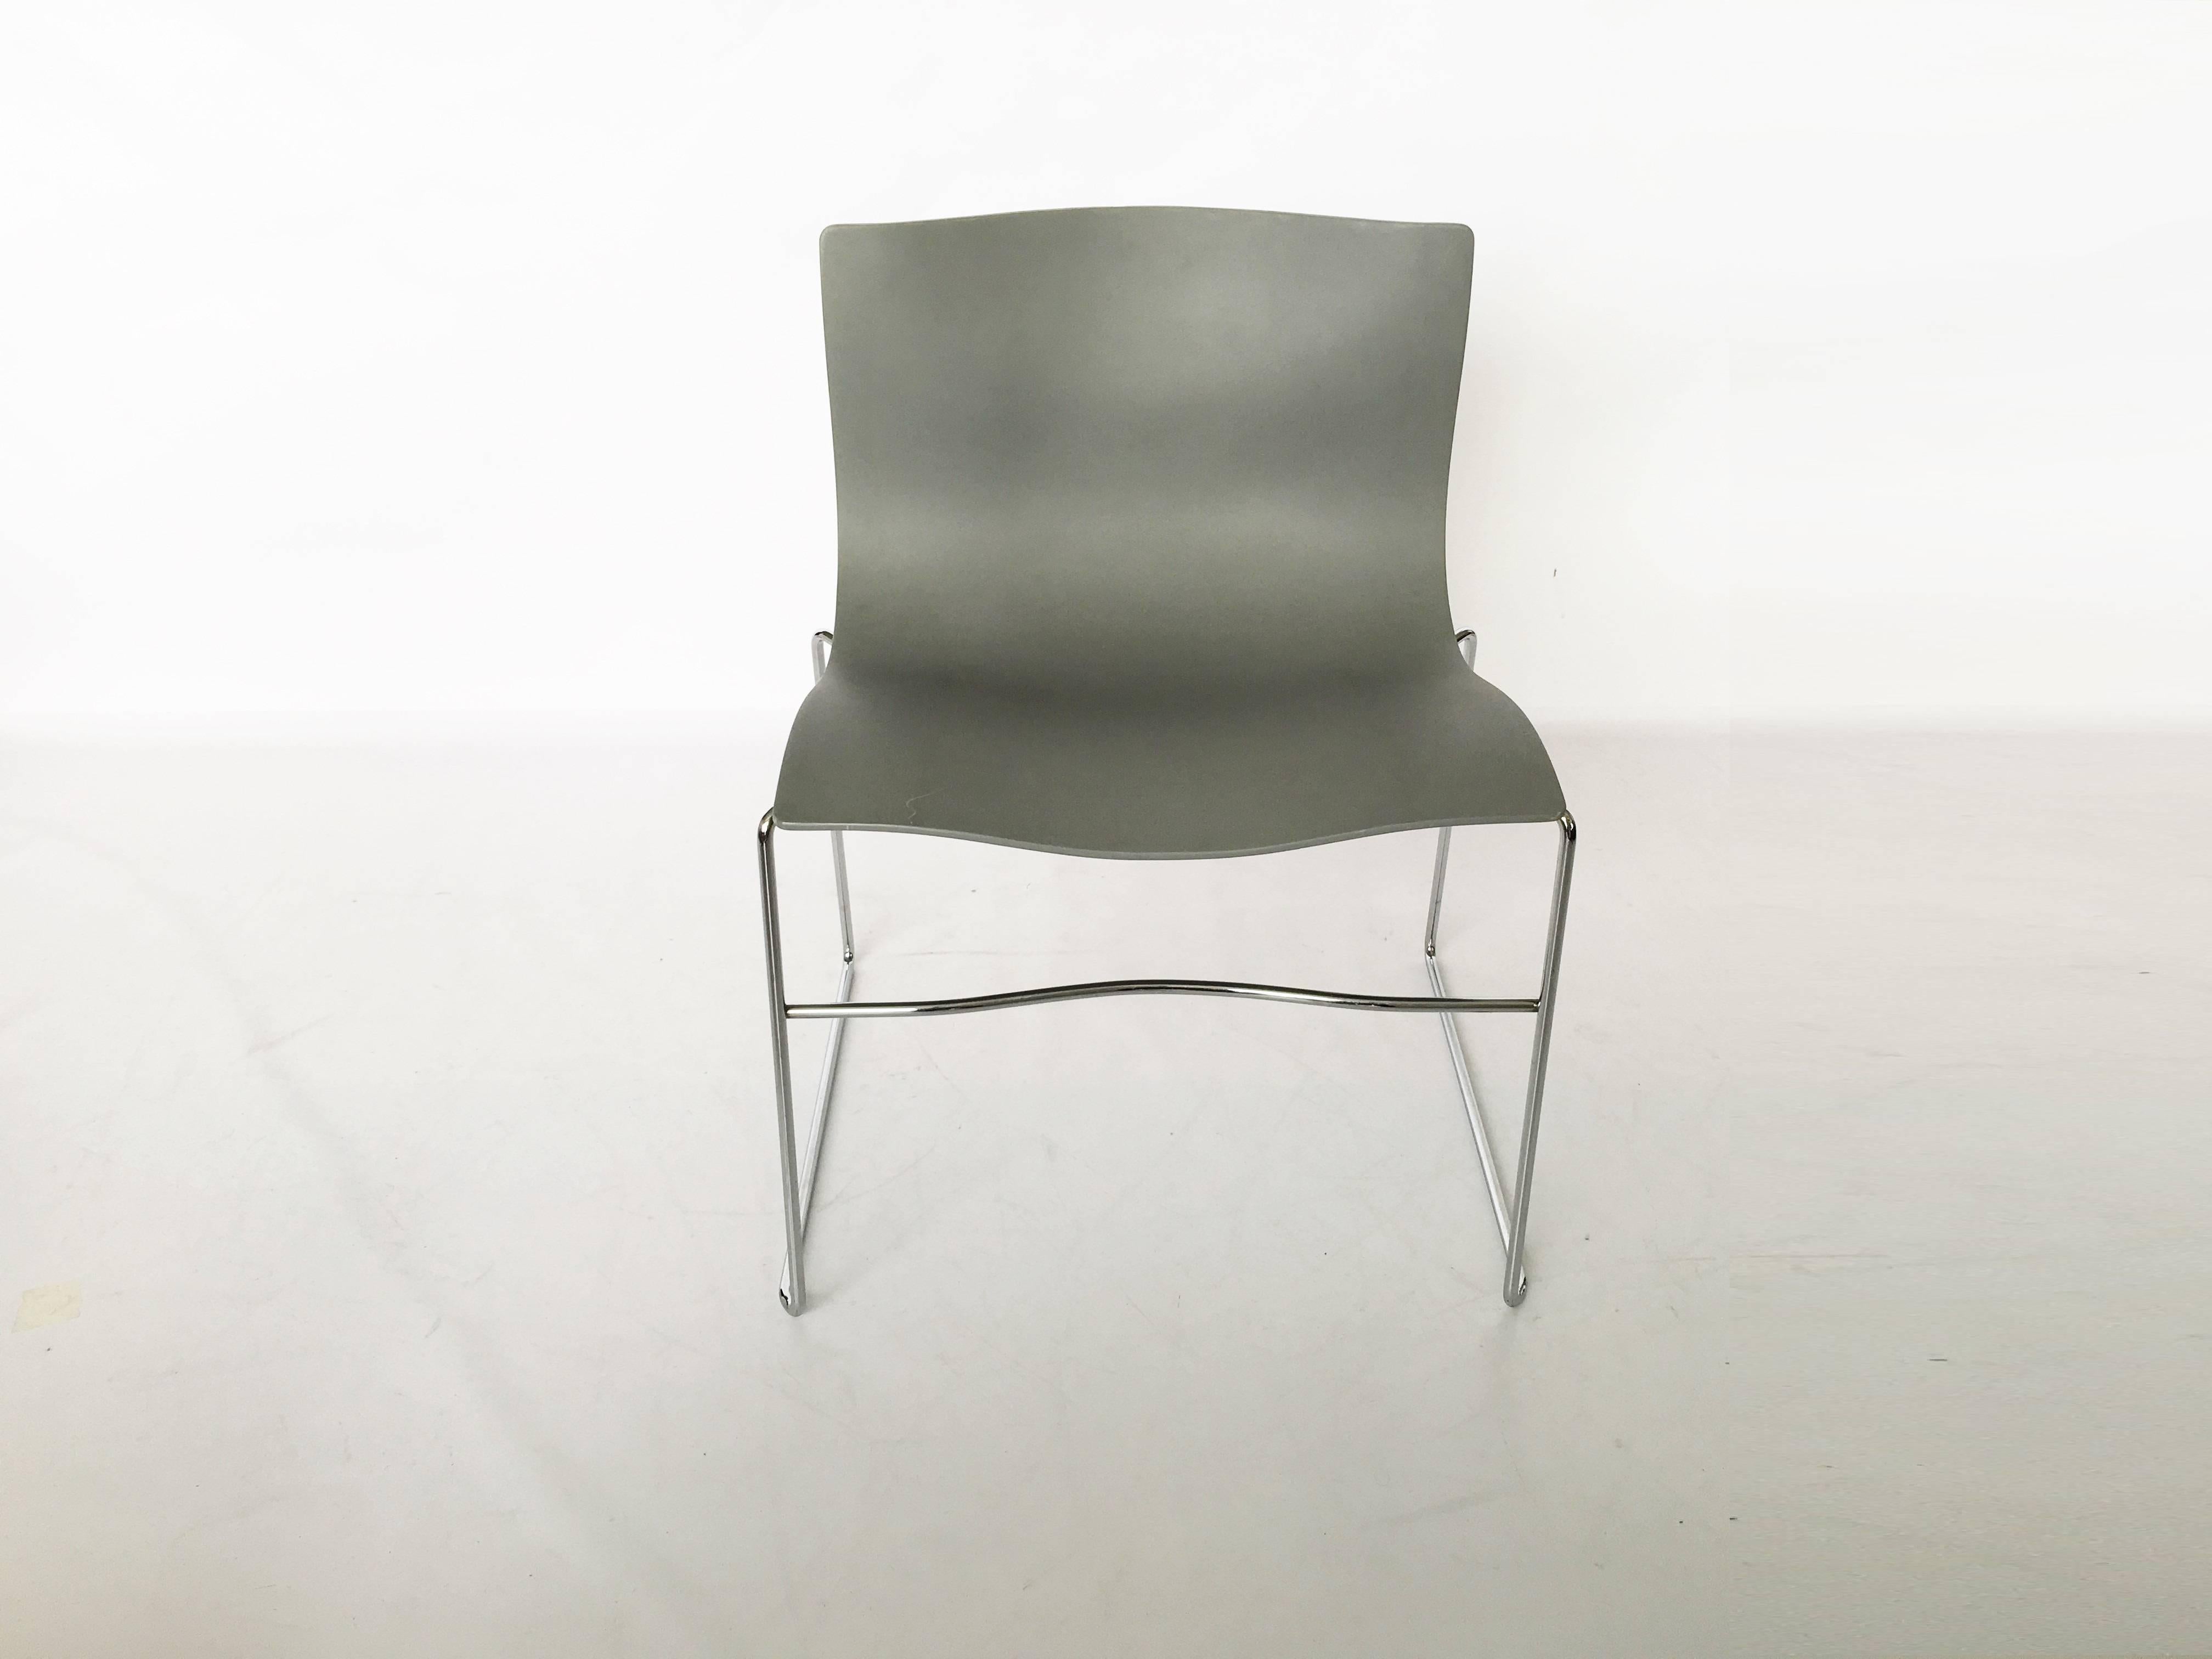 Twenty Massimo Vignelli Handkerchief Chairs for Knoll in Gray For Sale 1